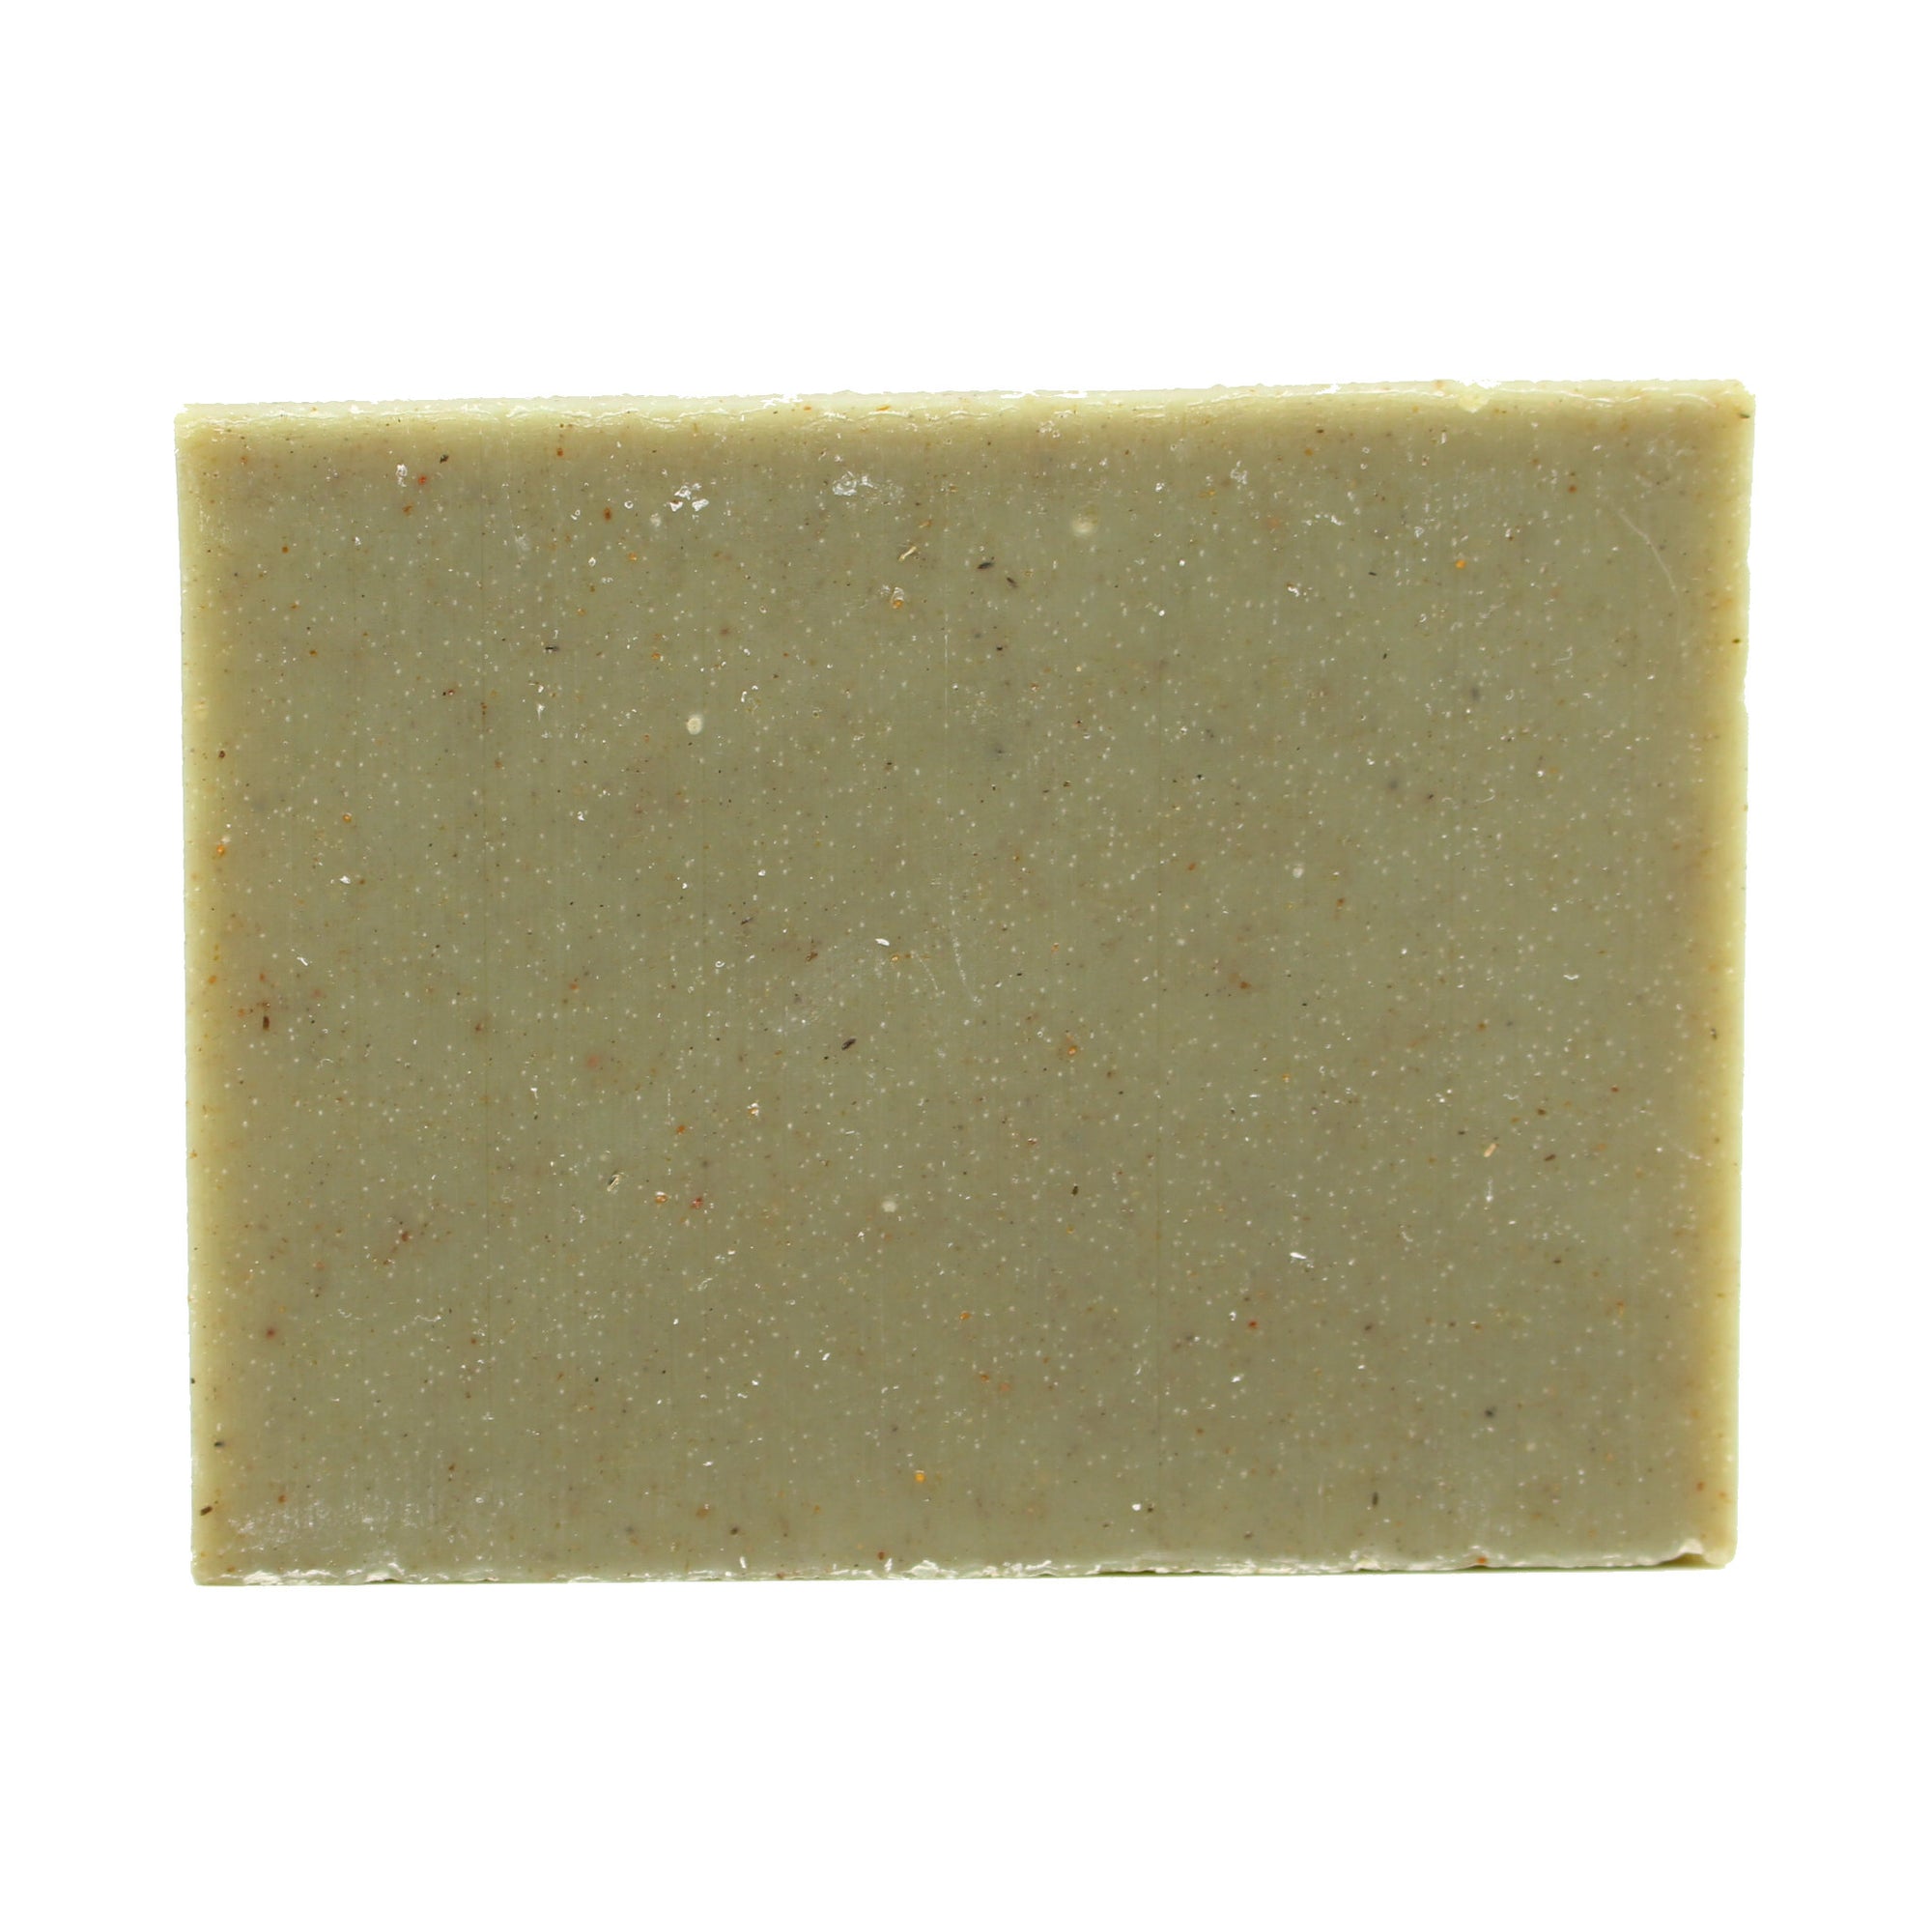 A naked bar of "Grove" cedar & pine essential oil and rhassoul clay organic bar soap from ground Soap. 